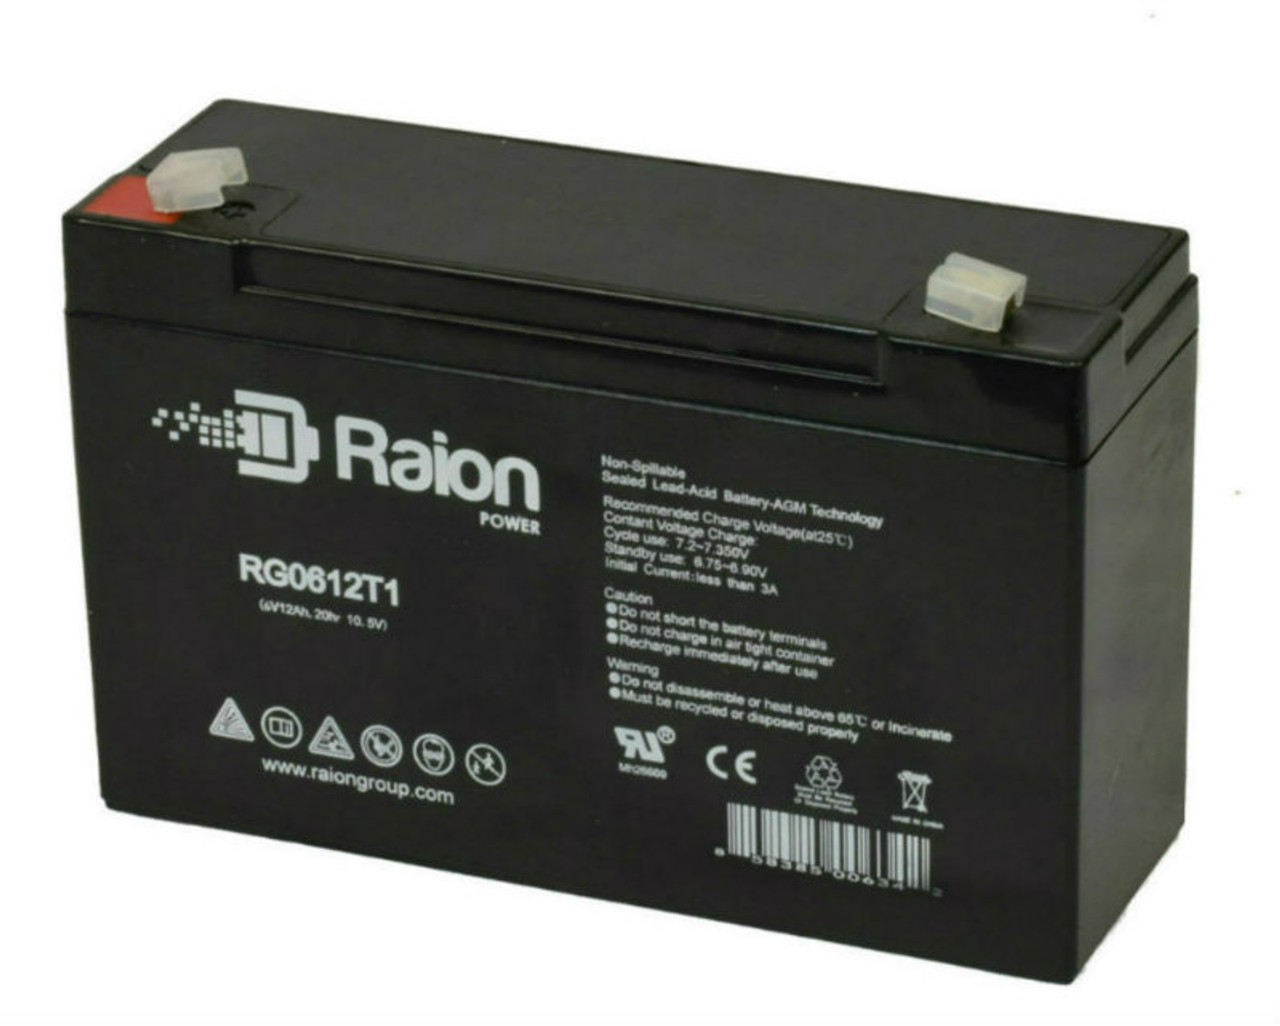 Raion Power RG06120T1 Replacement Battery for Leoch Battery DJW6-12